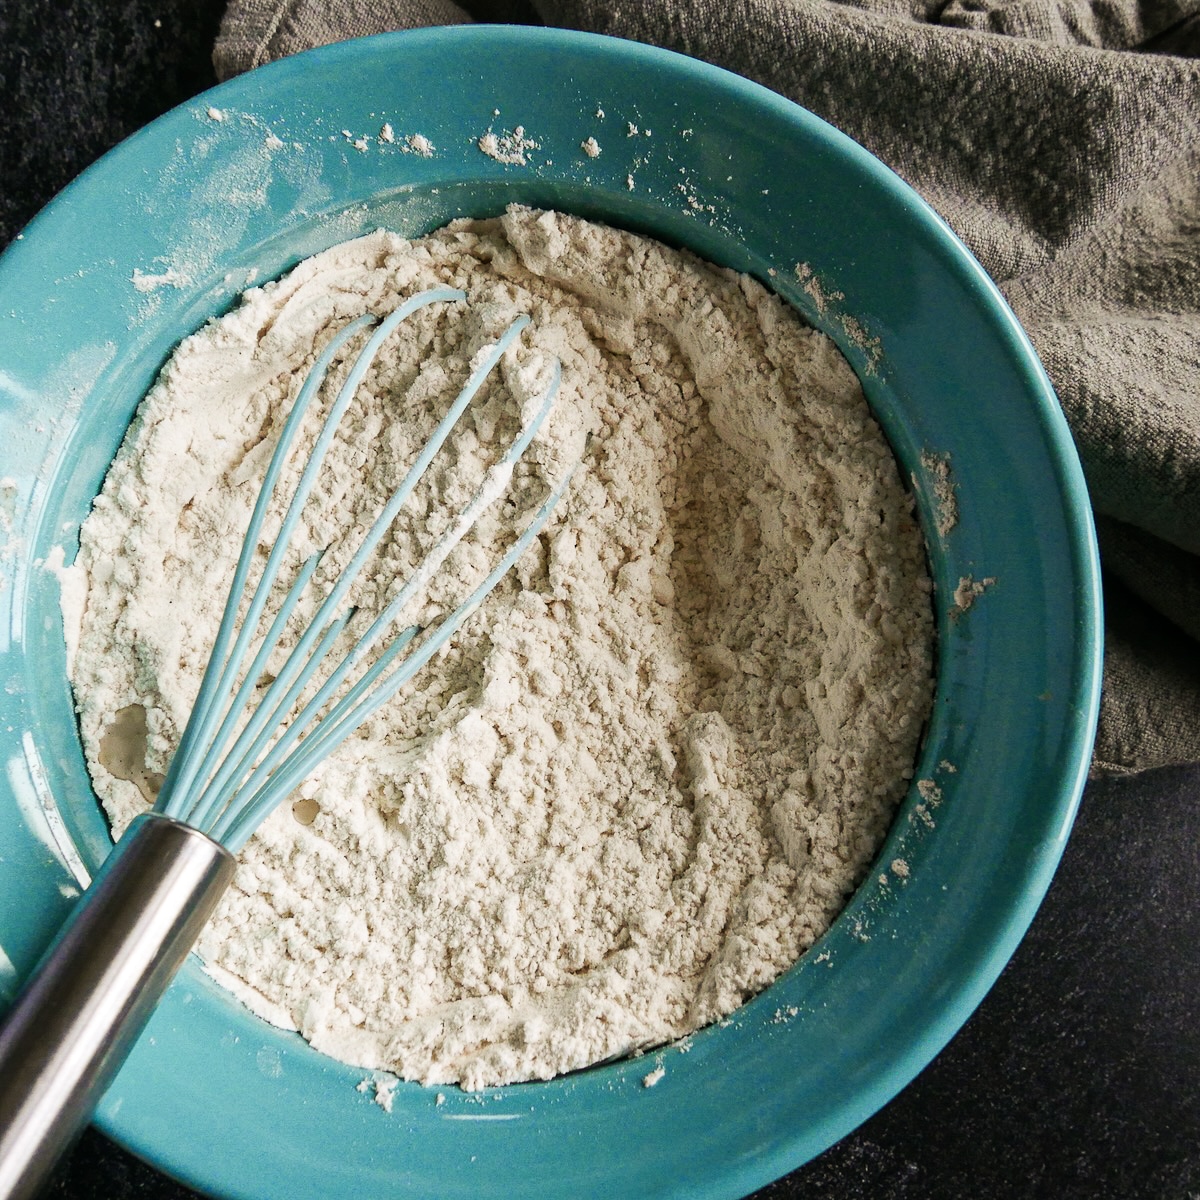 Dry ingredients whisked together in a medium bowl.